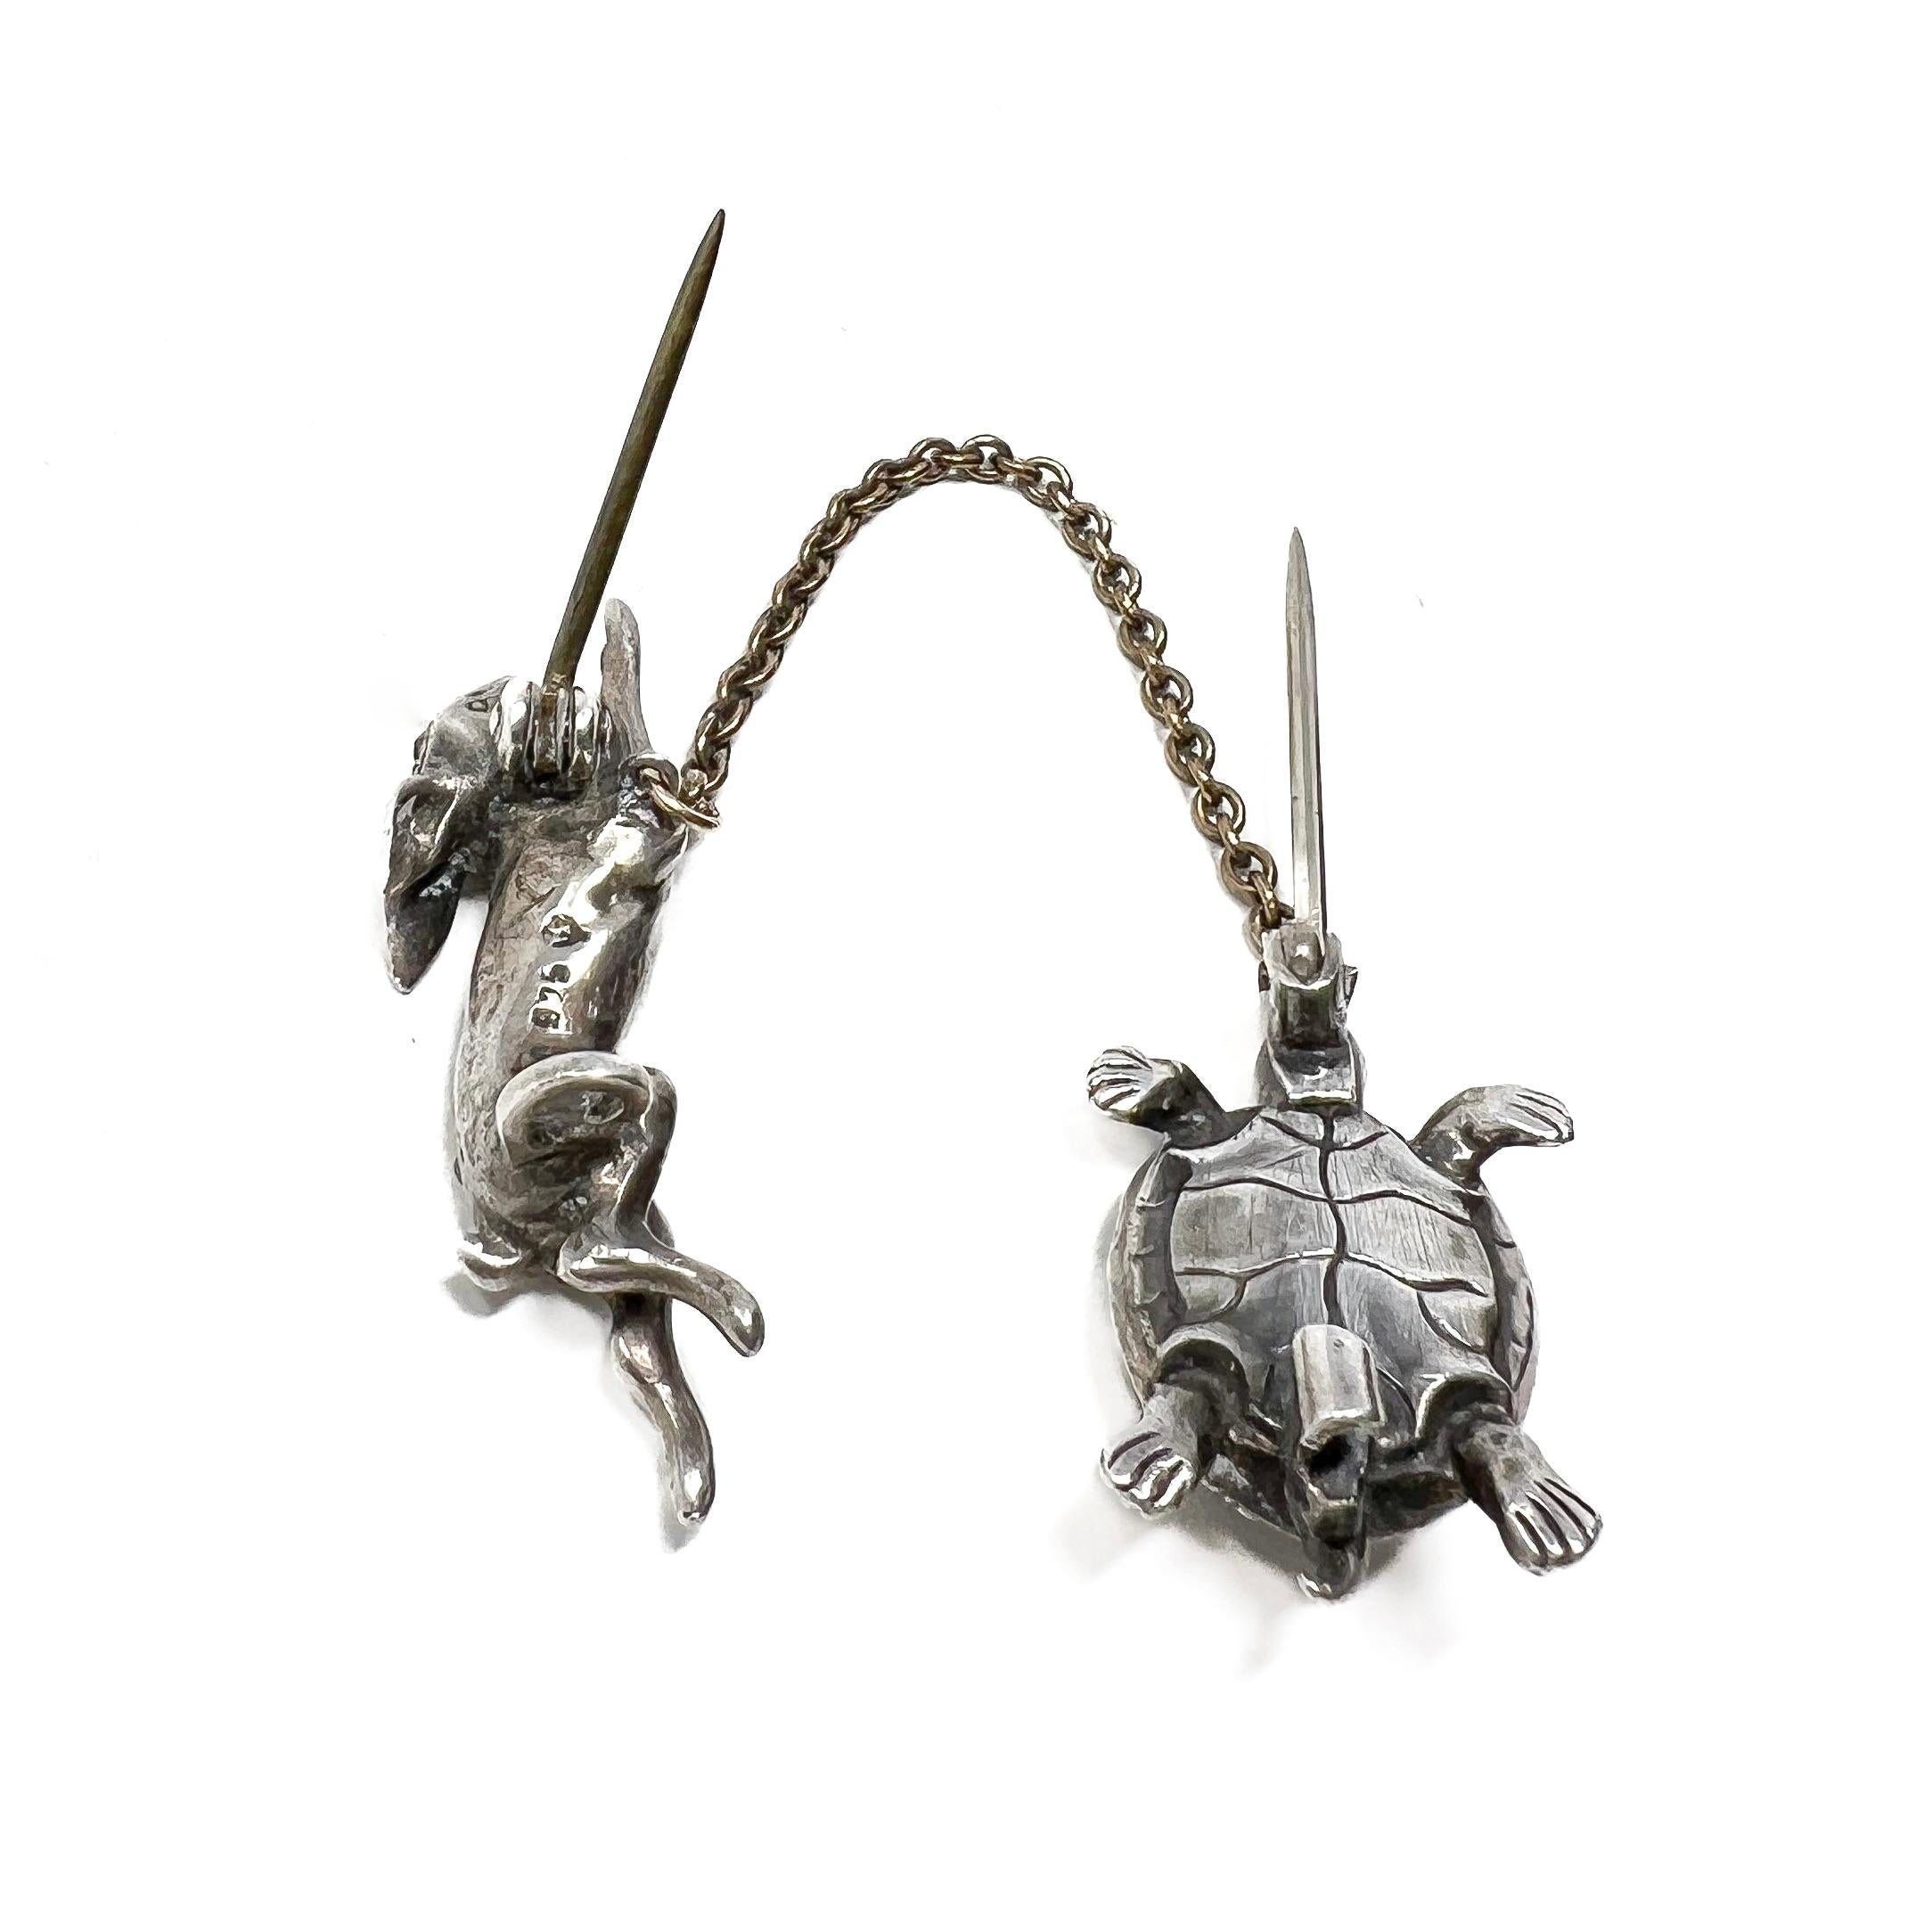 Knoll and Pregizer Early 20th Century Tortoise and Hare Antique Collar Pins For Sale 3